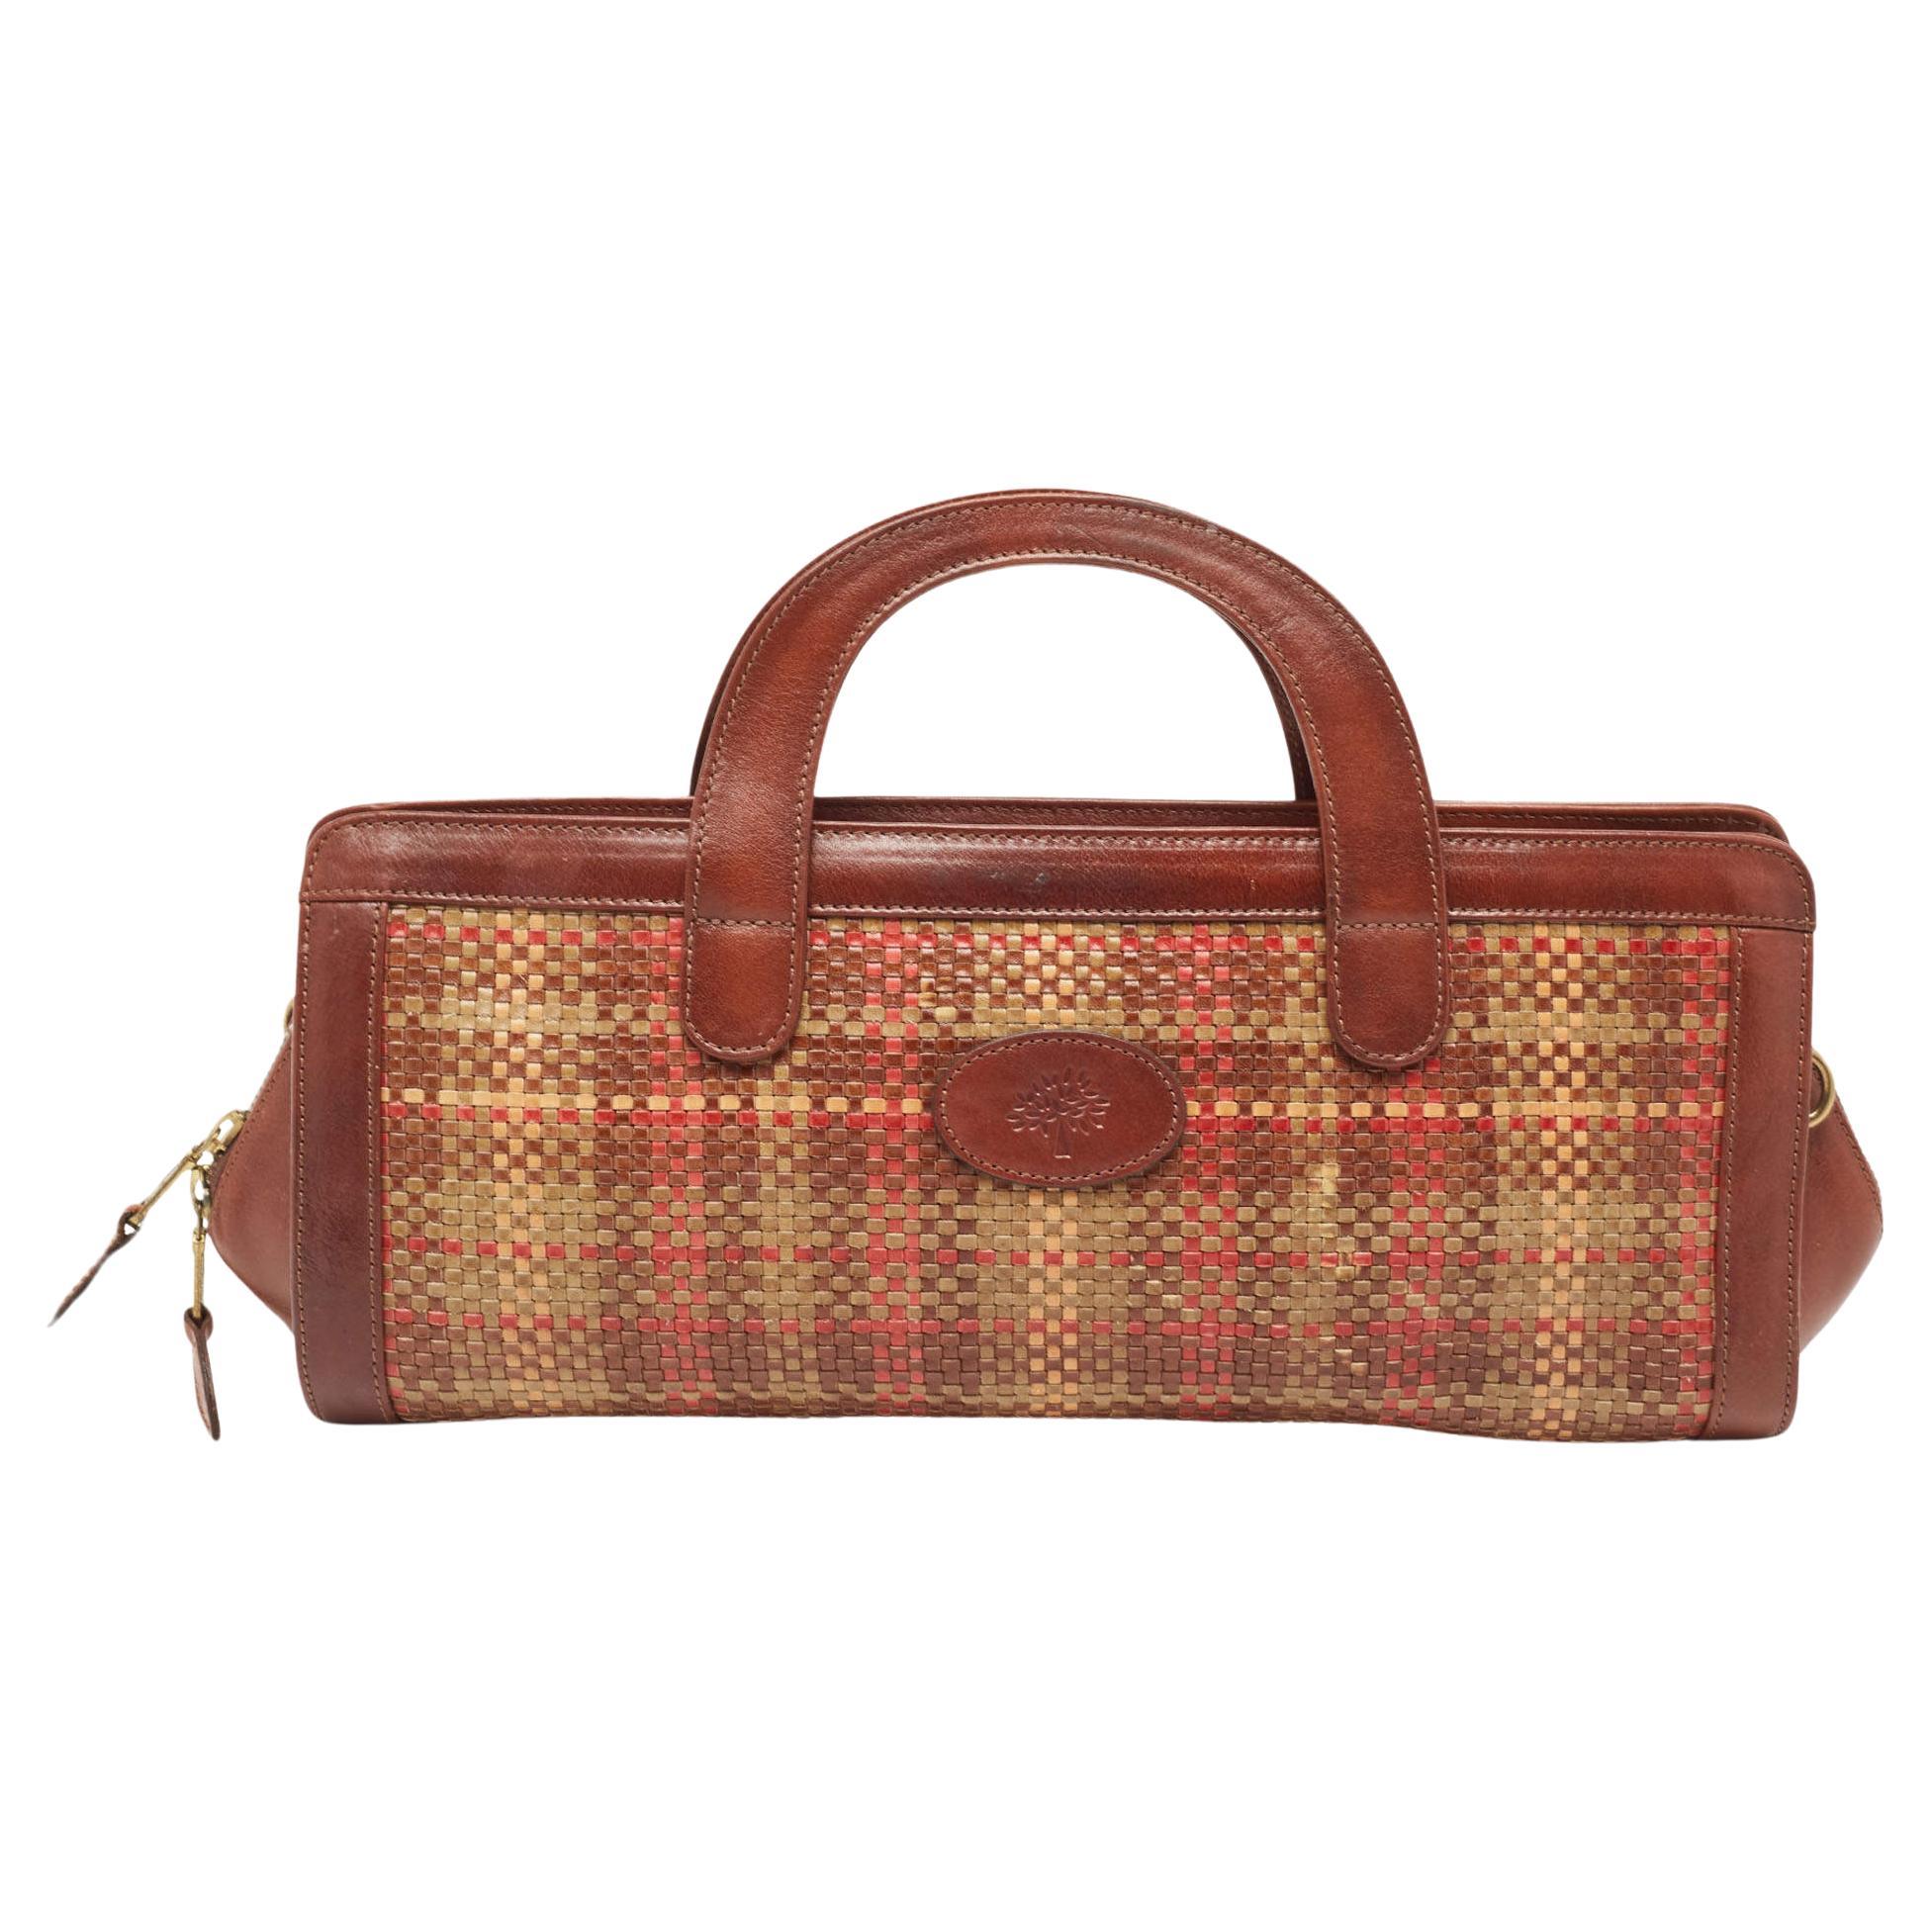 Mulberry Brown/Multicolor Woven Leather Satchel For Sale